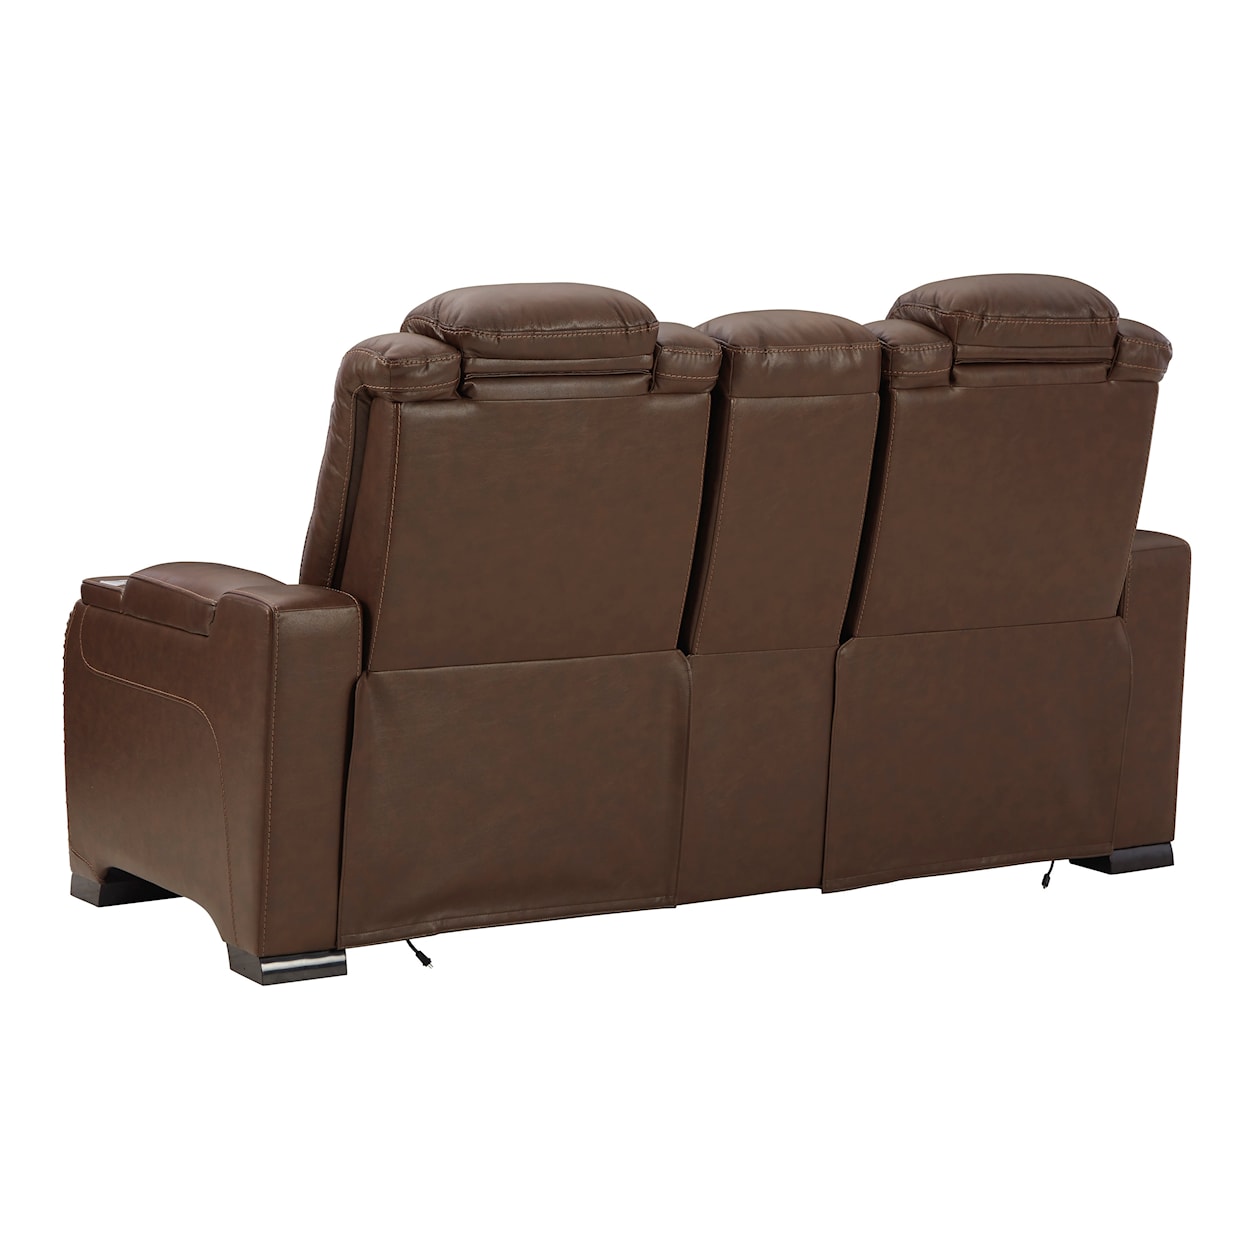 Benchcraft The Man-Den Power Reclining Loveseat with Console